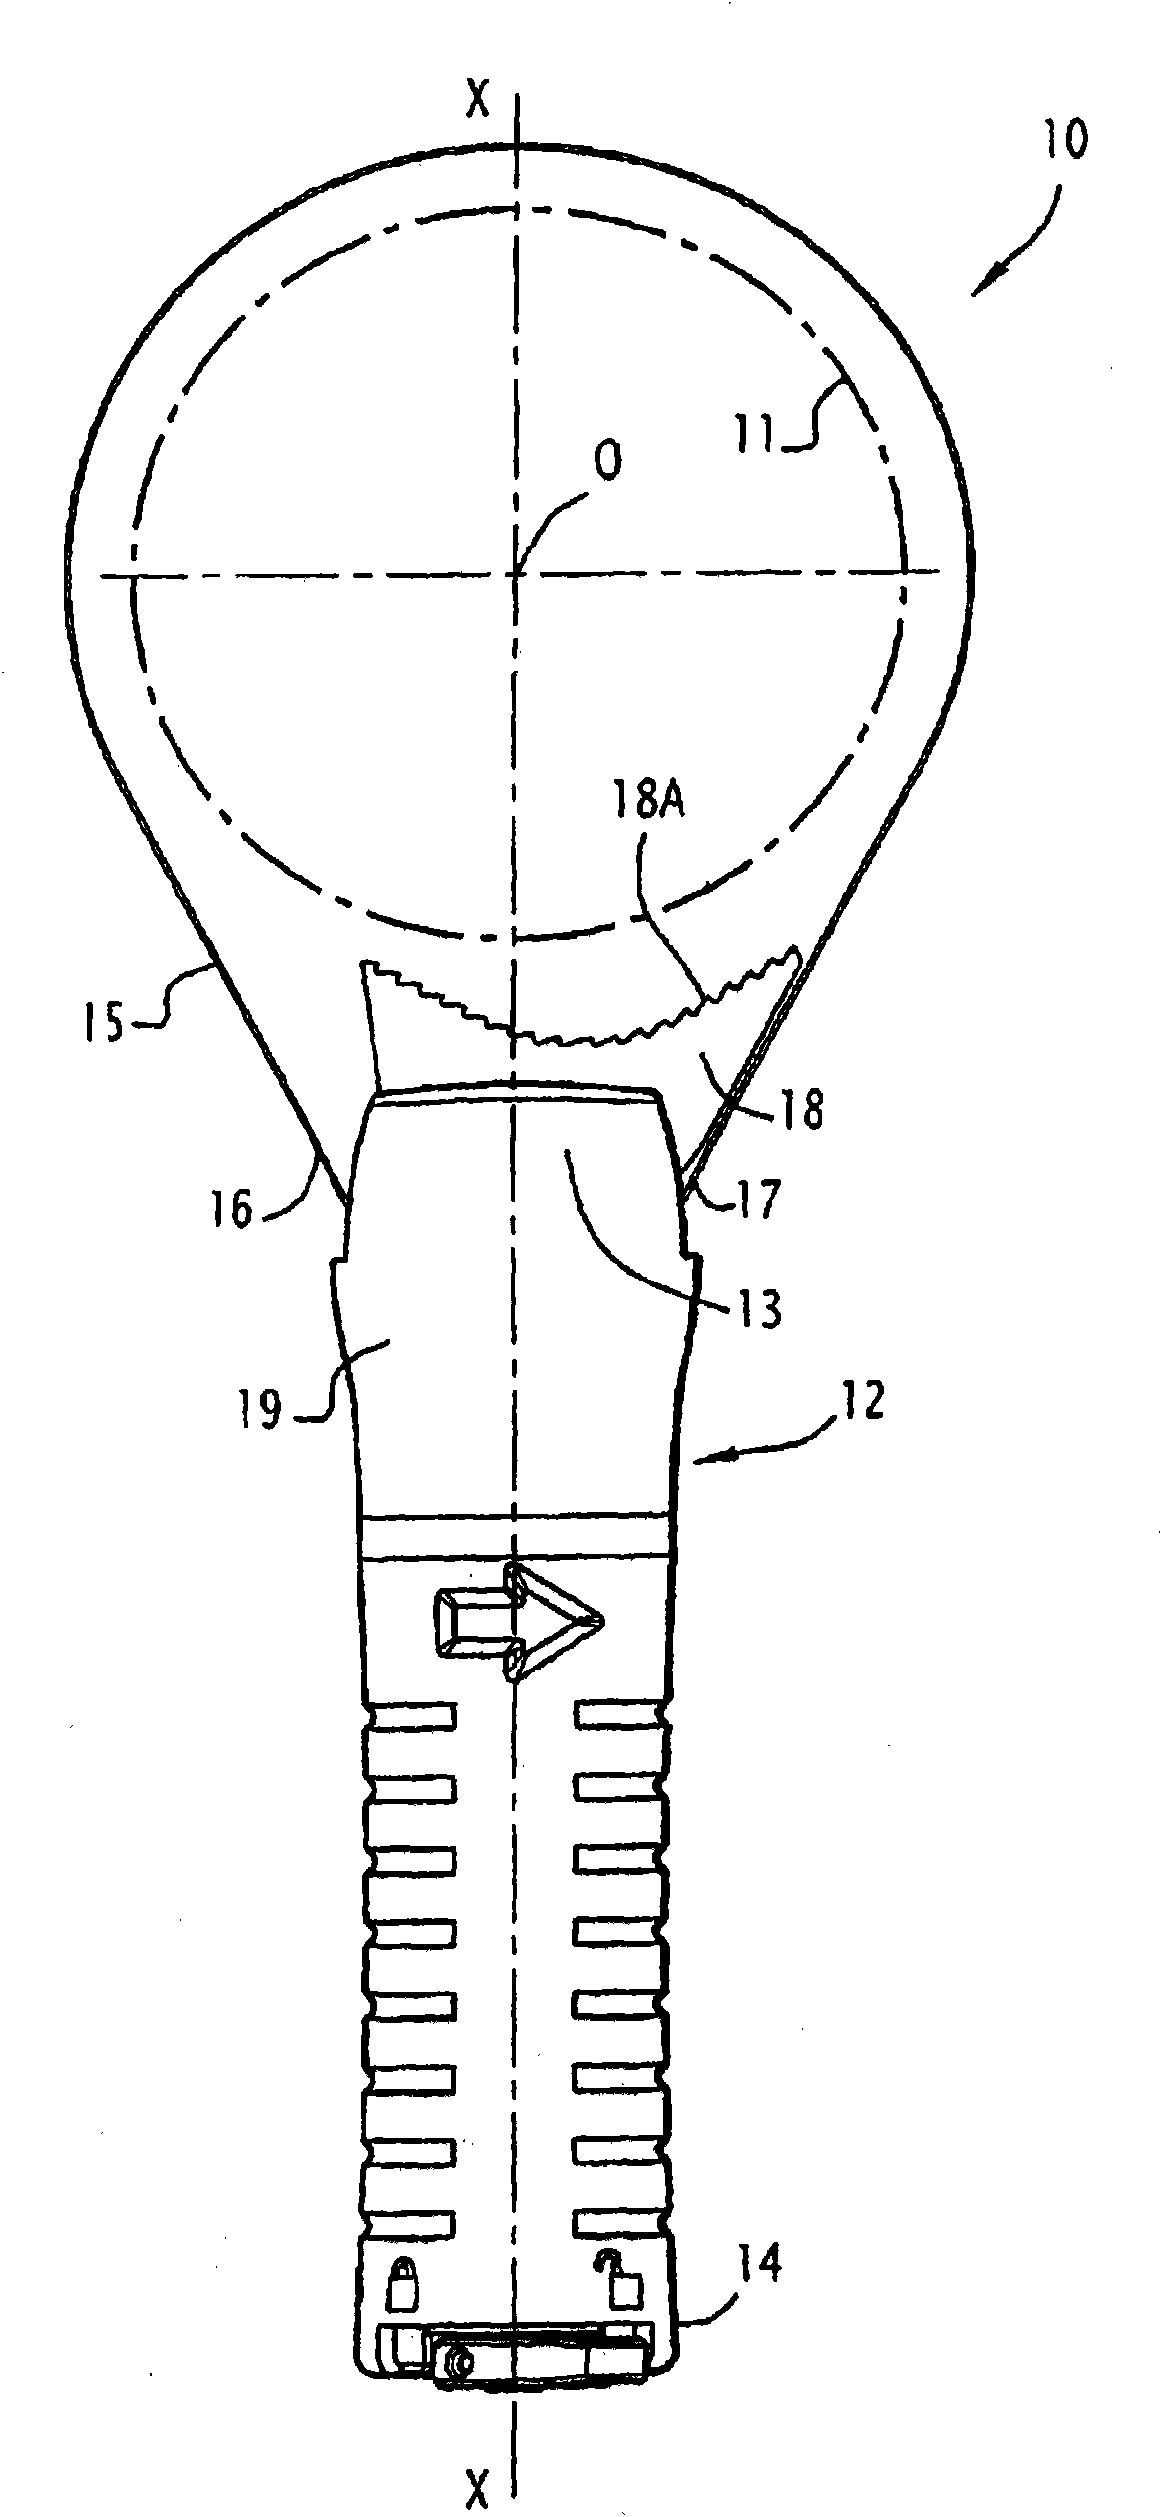 Advanced strap pipe wrench for driving an object having a generally cylindrical shape